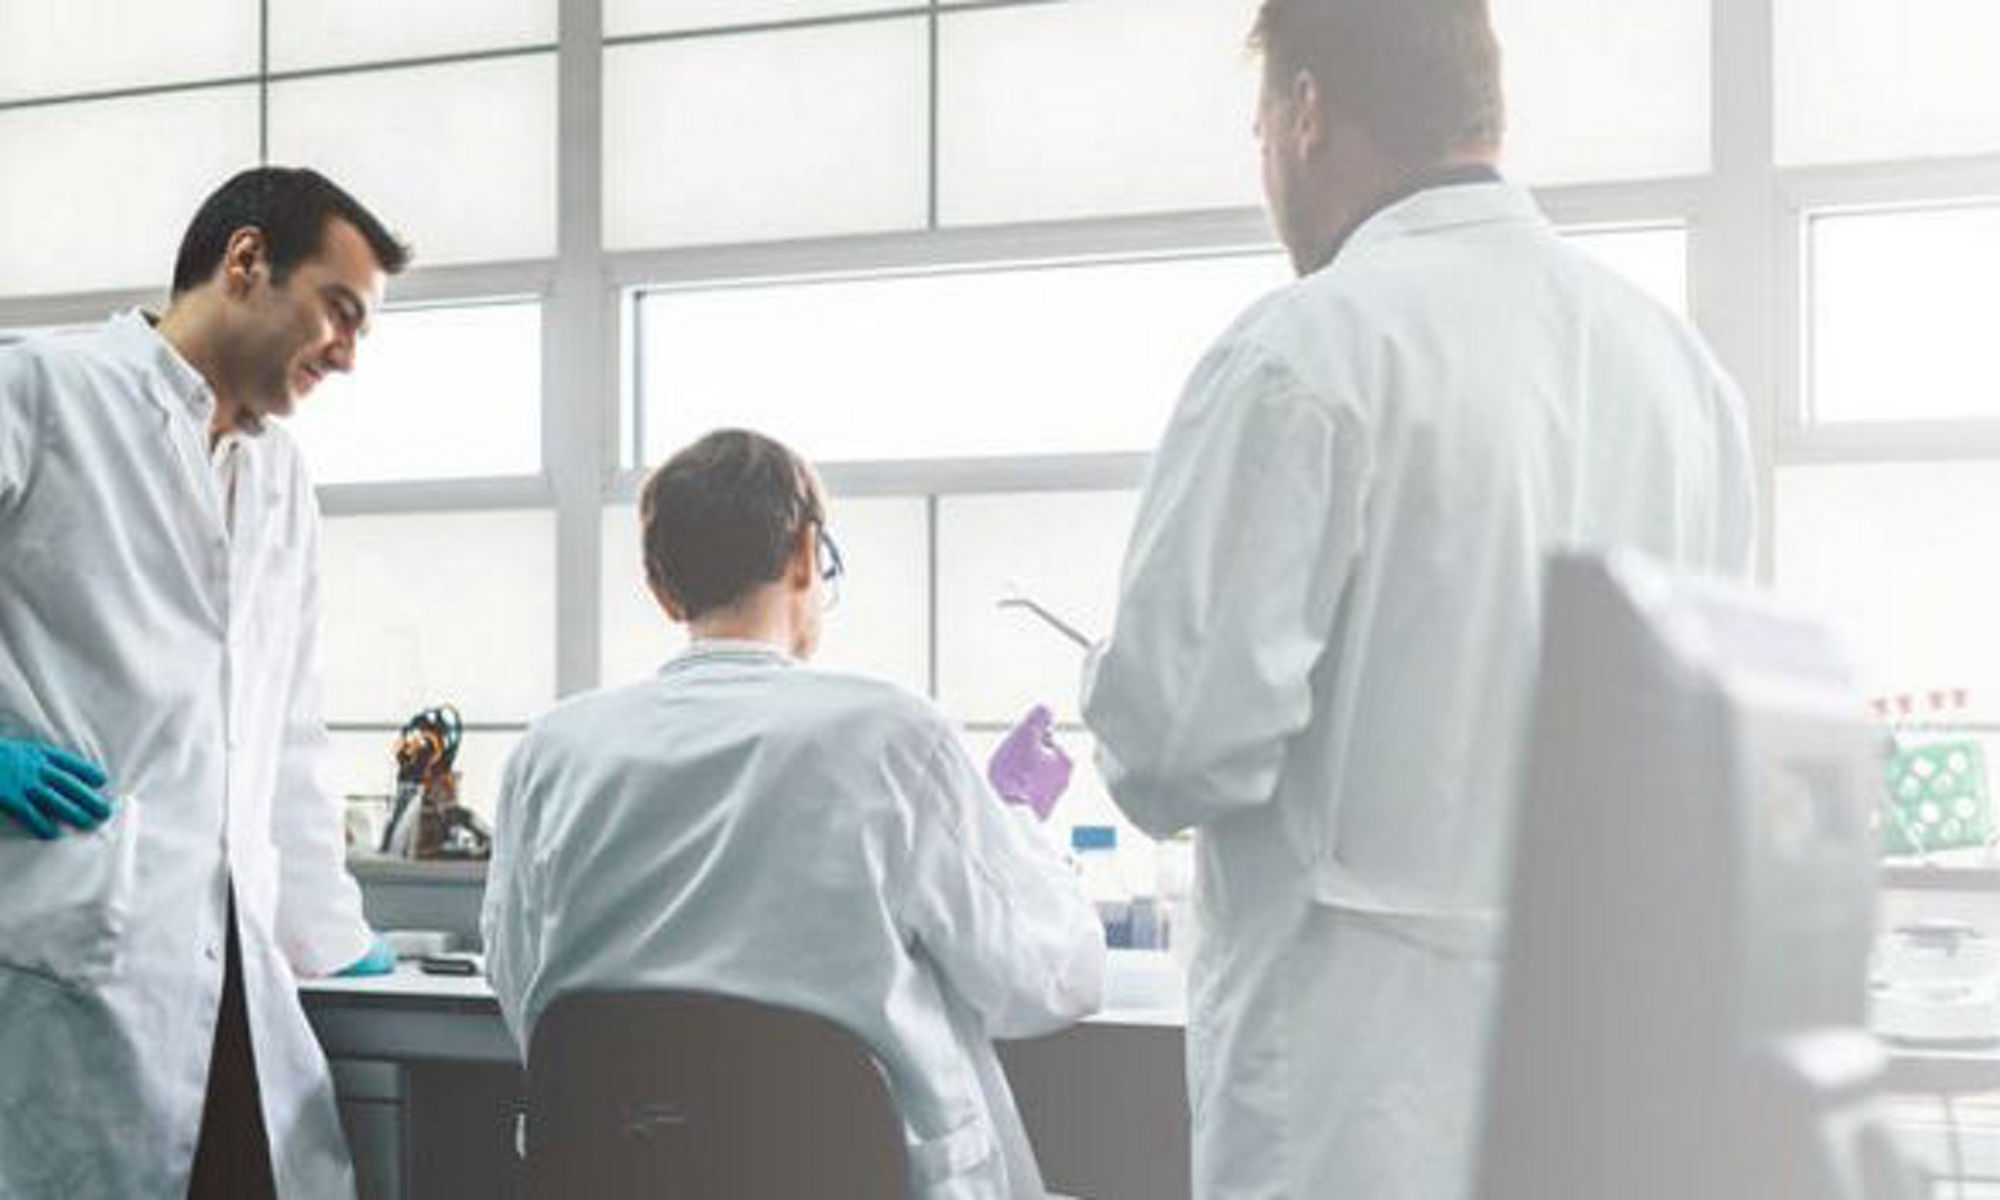 Three co-workers in lab coats discussing something